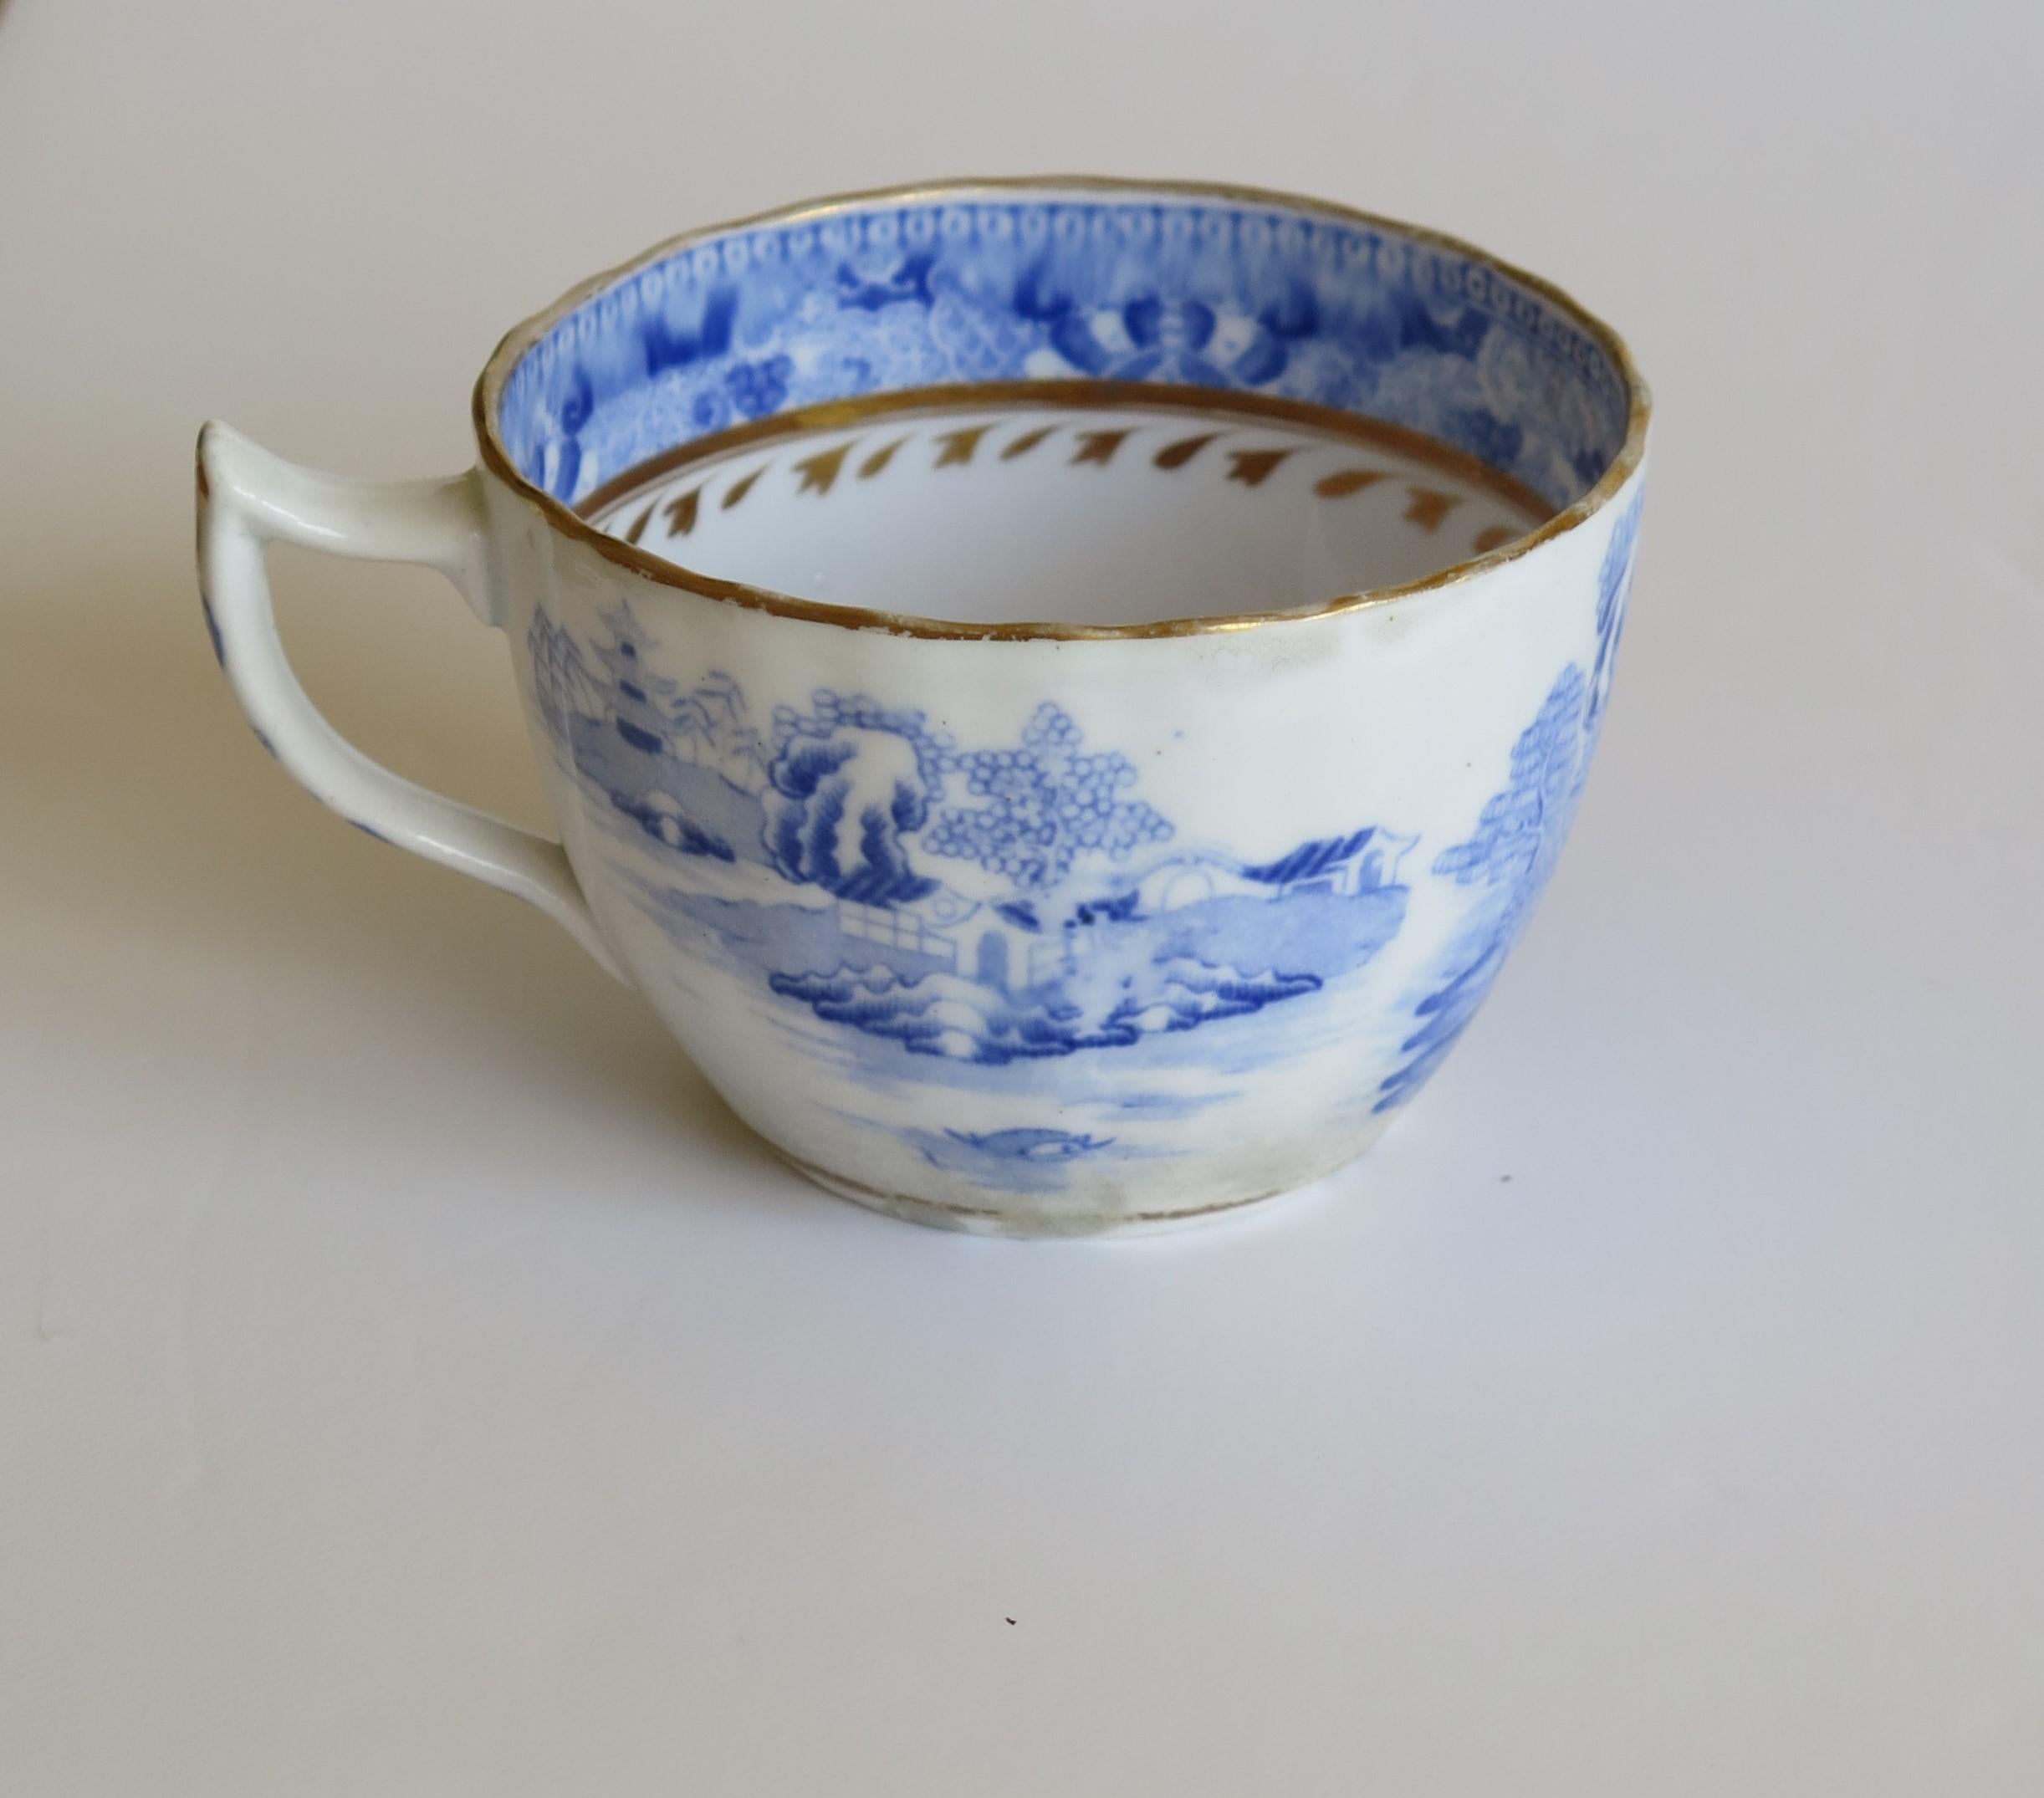 Miles Mason Porcelain Pair of Tea Cups Broseley Blue and White Pattern, Ca 1805 1